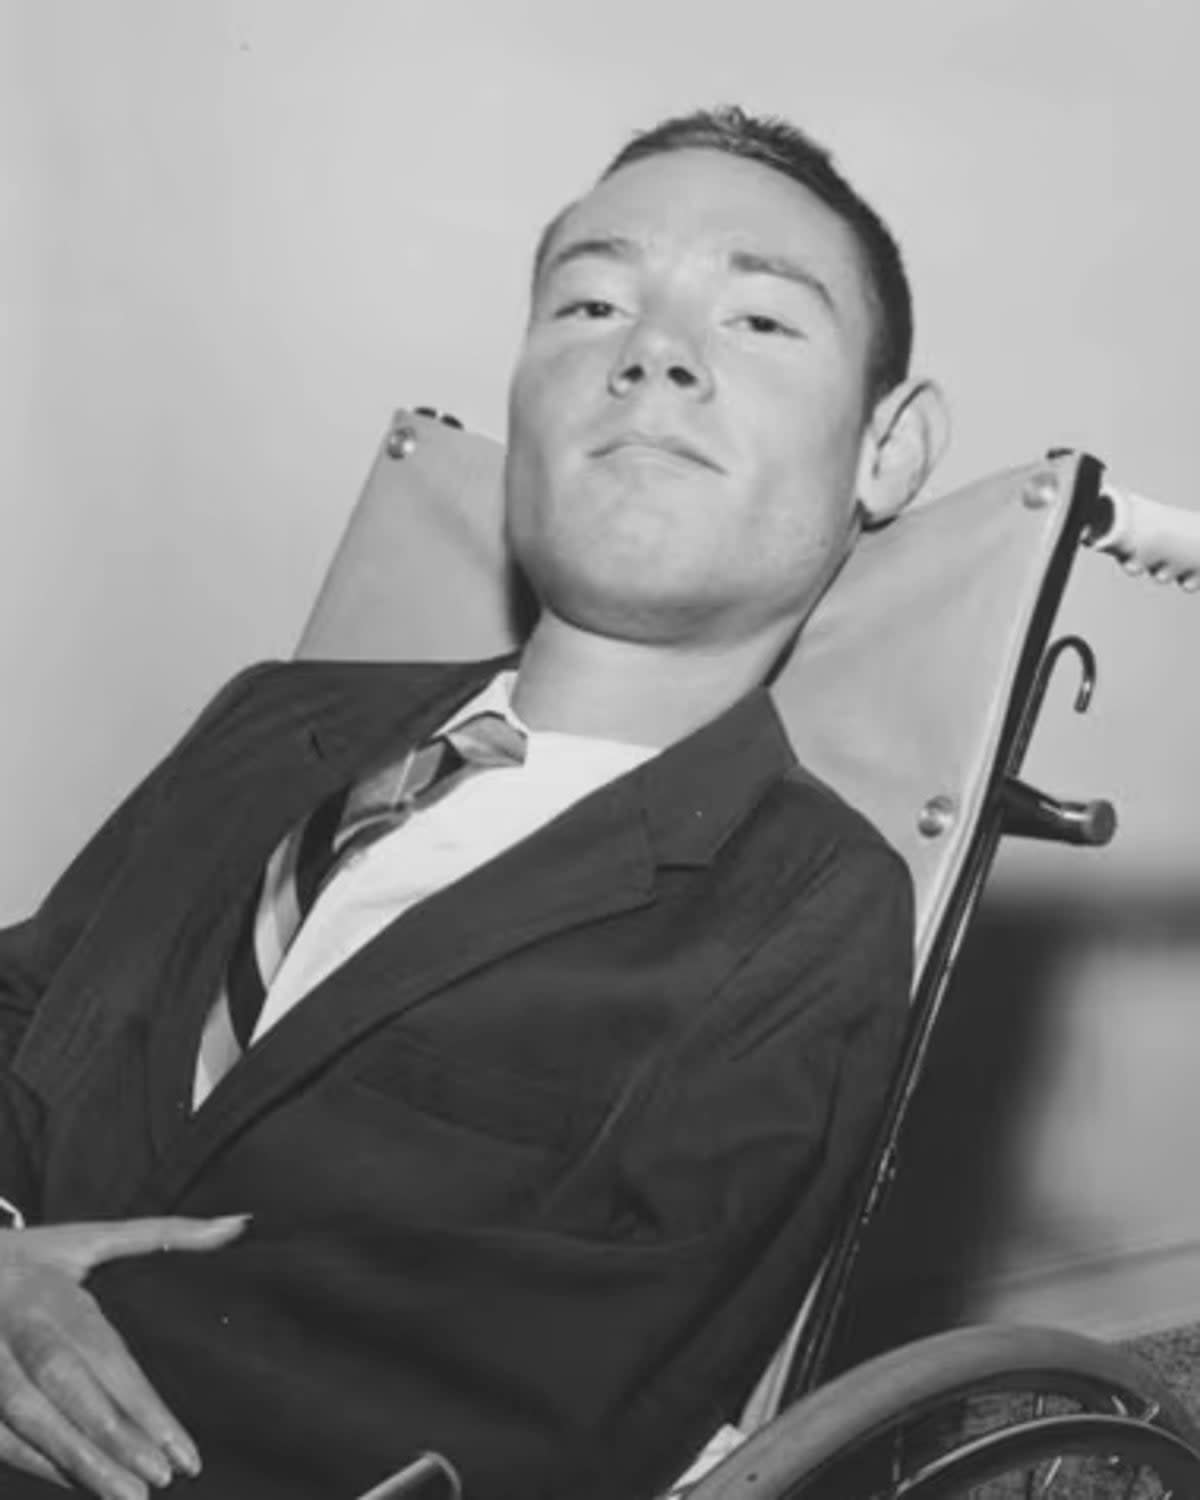 Paul Alexander as a young man, outside his iron lung (Paul Alexander)